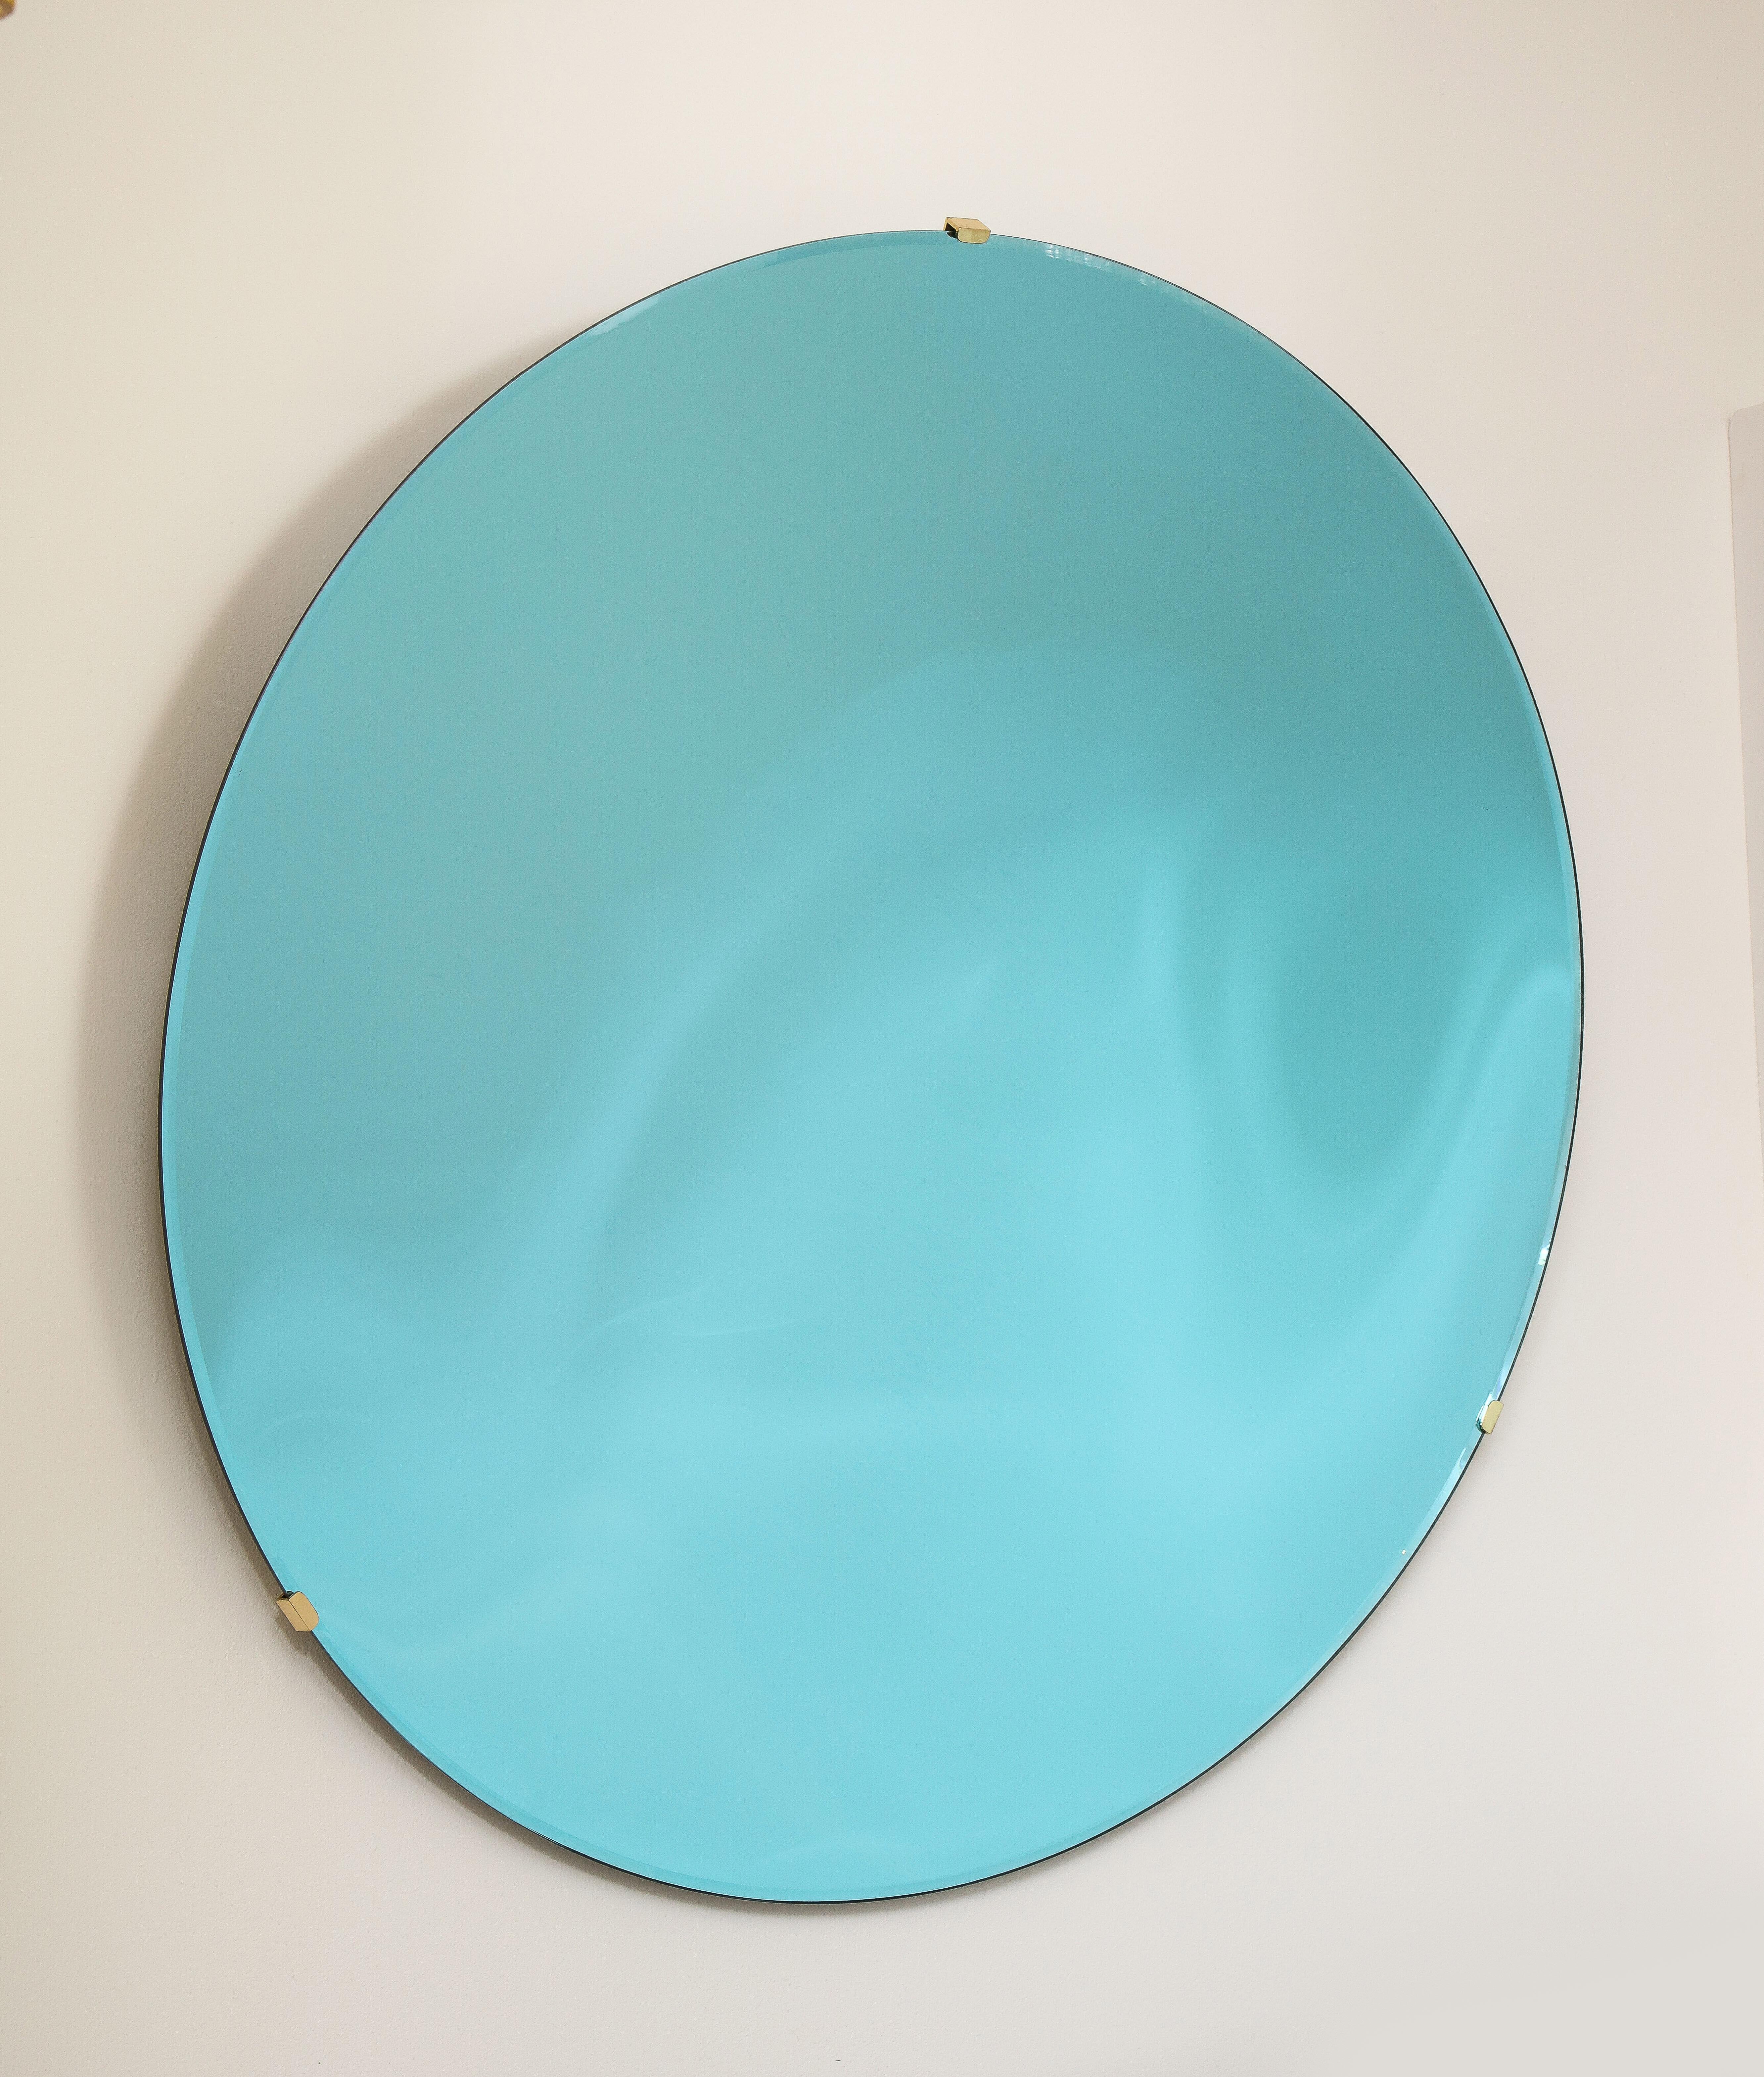 Contemporary Large Sculptural Round Concave Blue Green Mirror or Wall Art, Italy, 2022